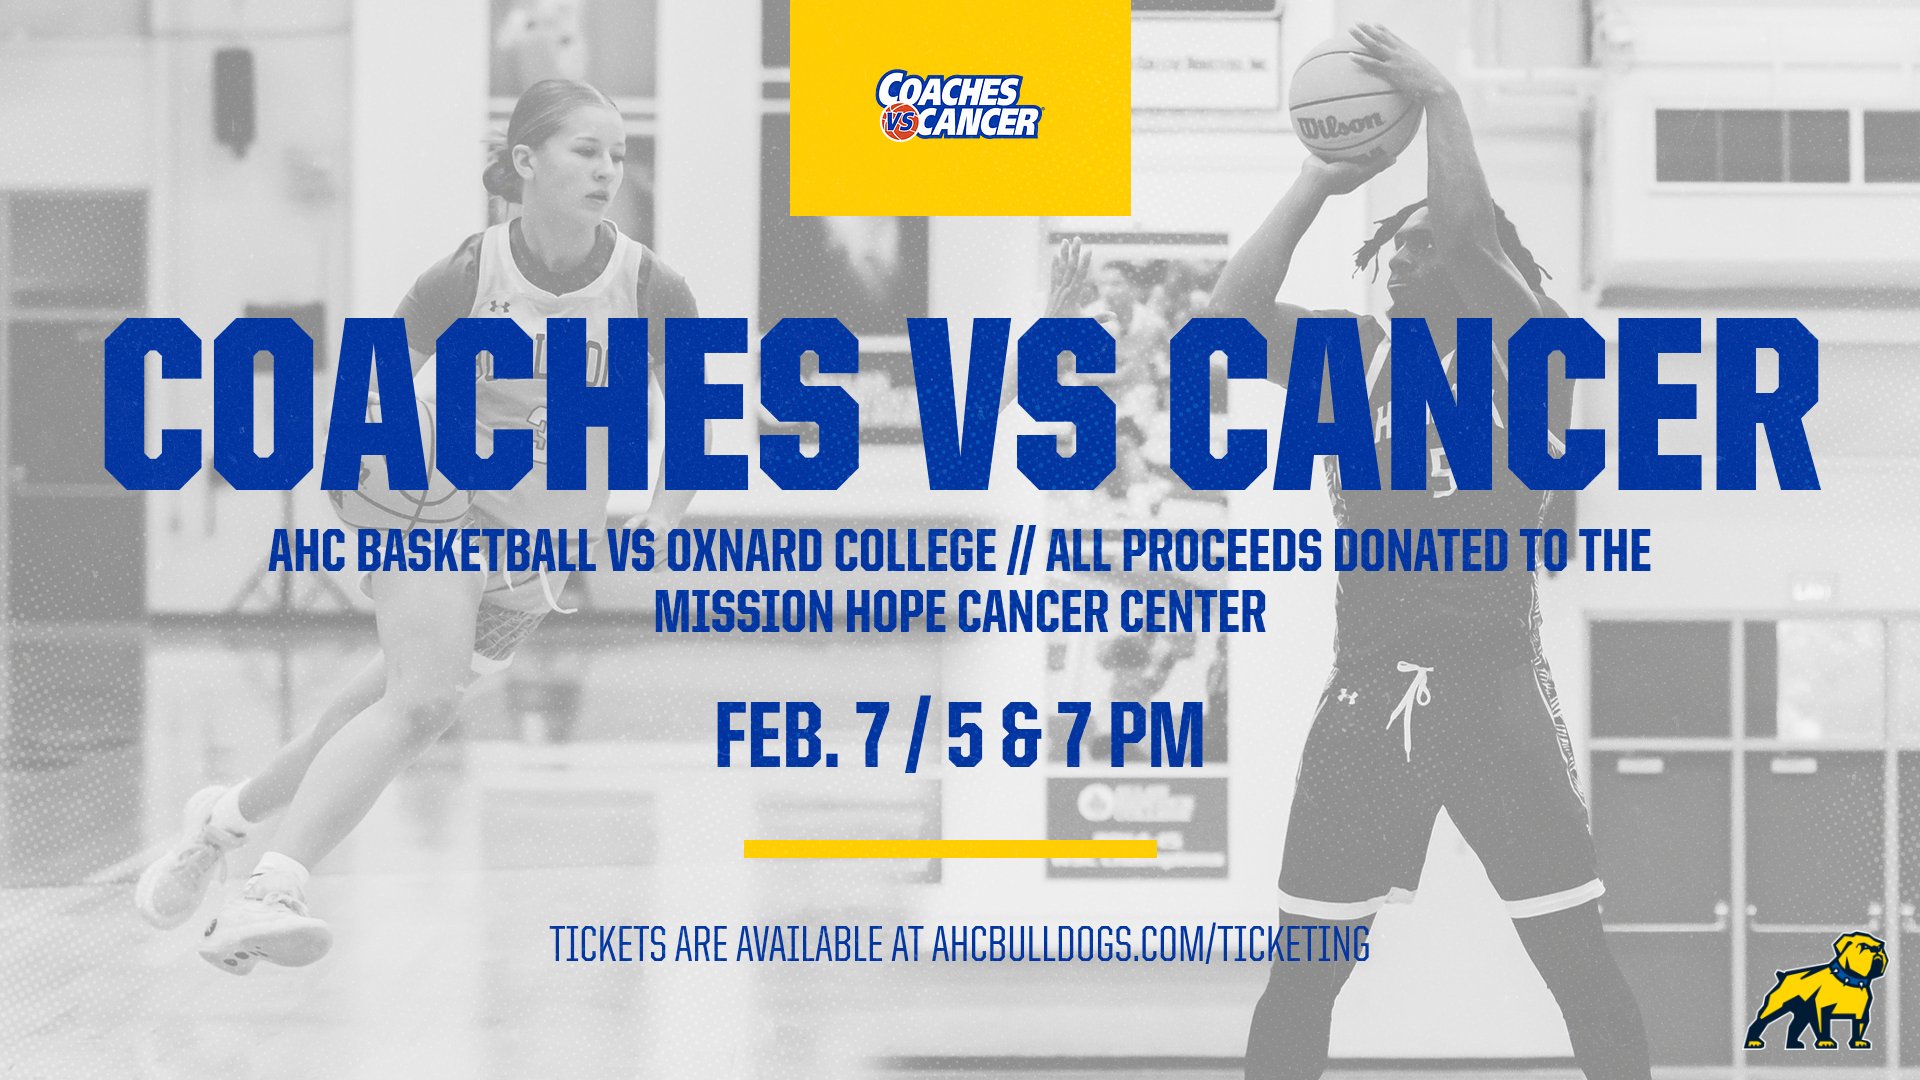 Men's & Women's Basketball to Host Annual Carney's Coaches vs Cancer Game on Feb. 7